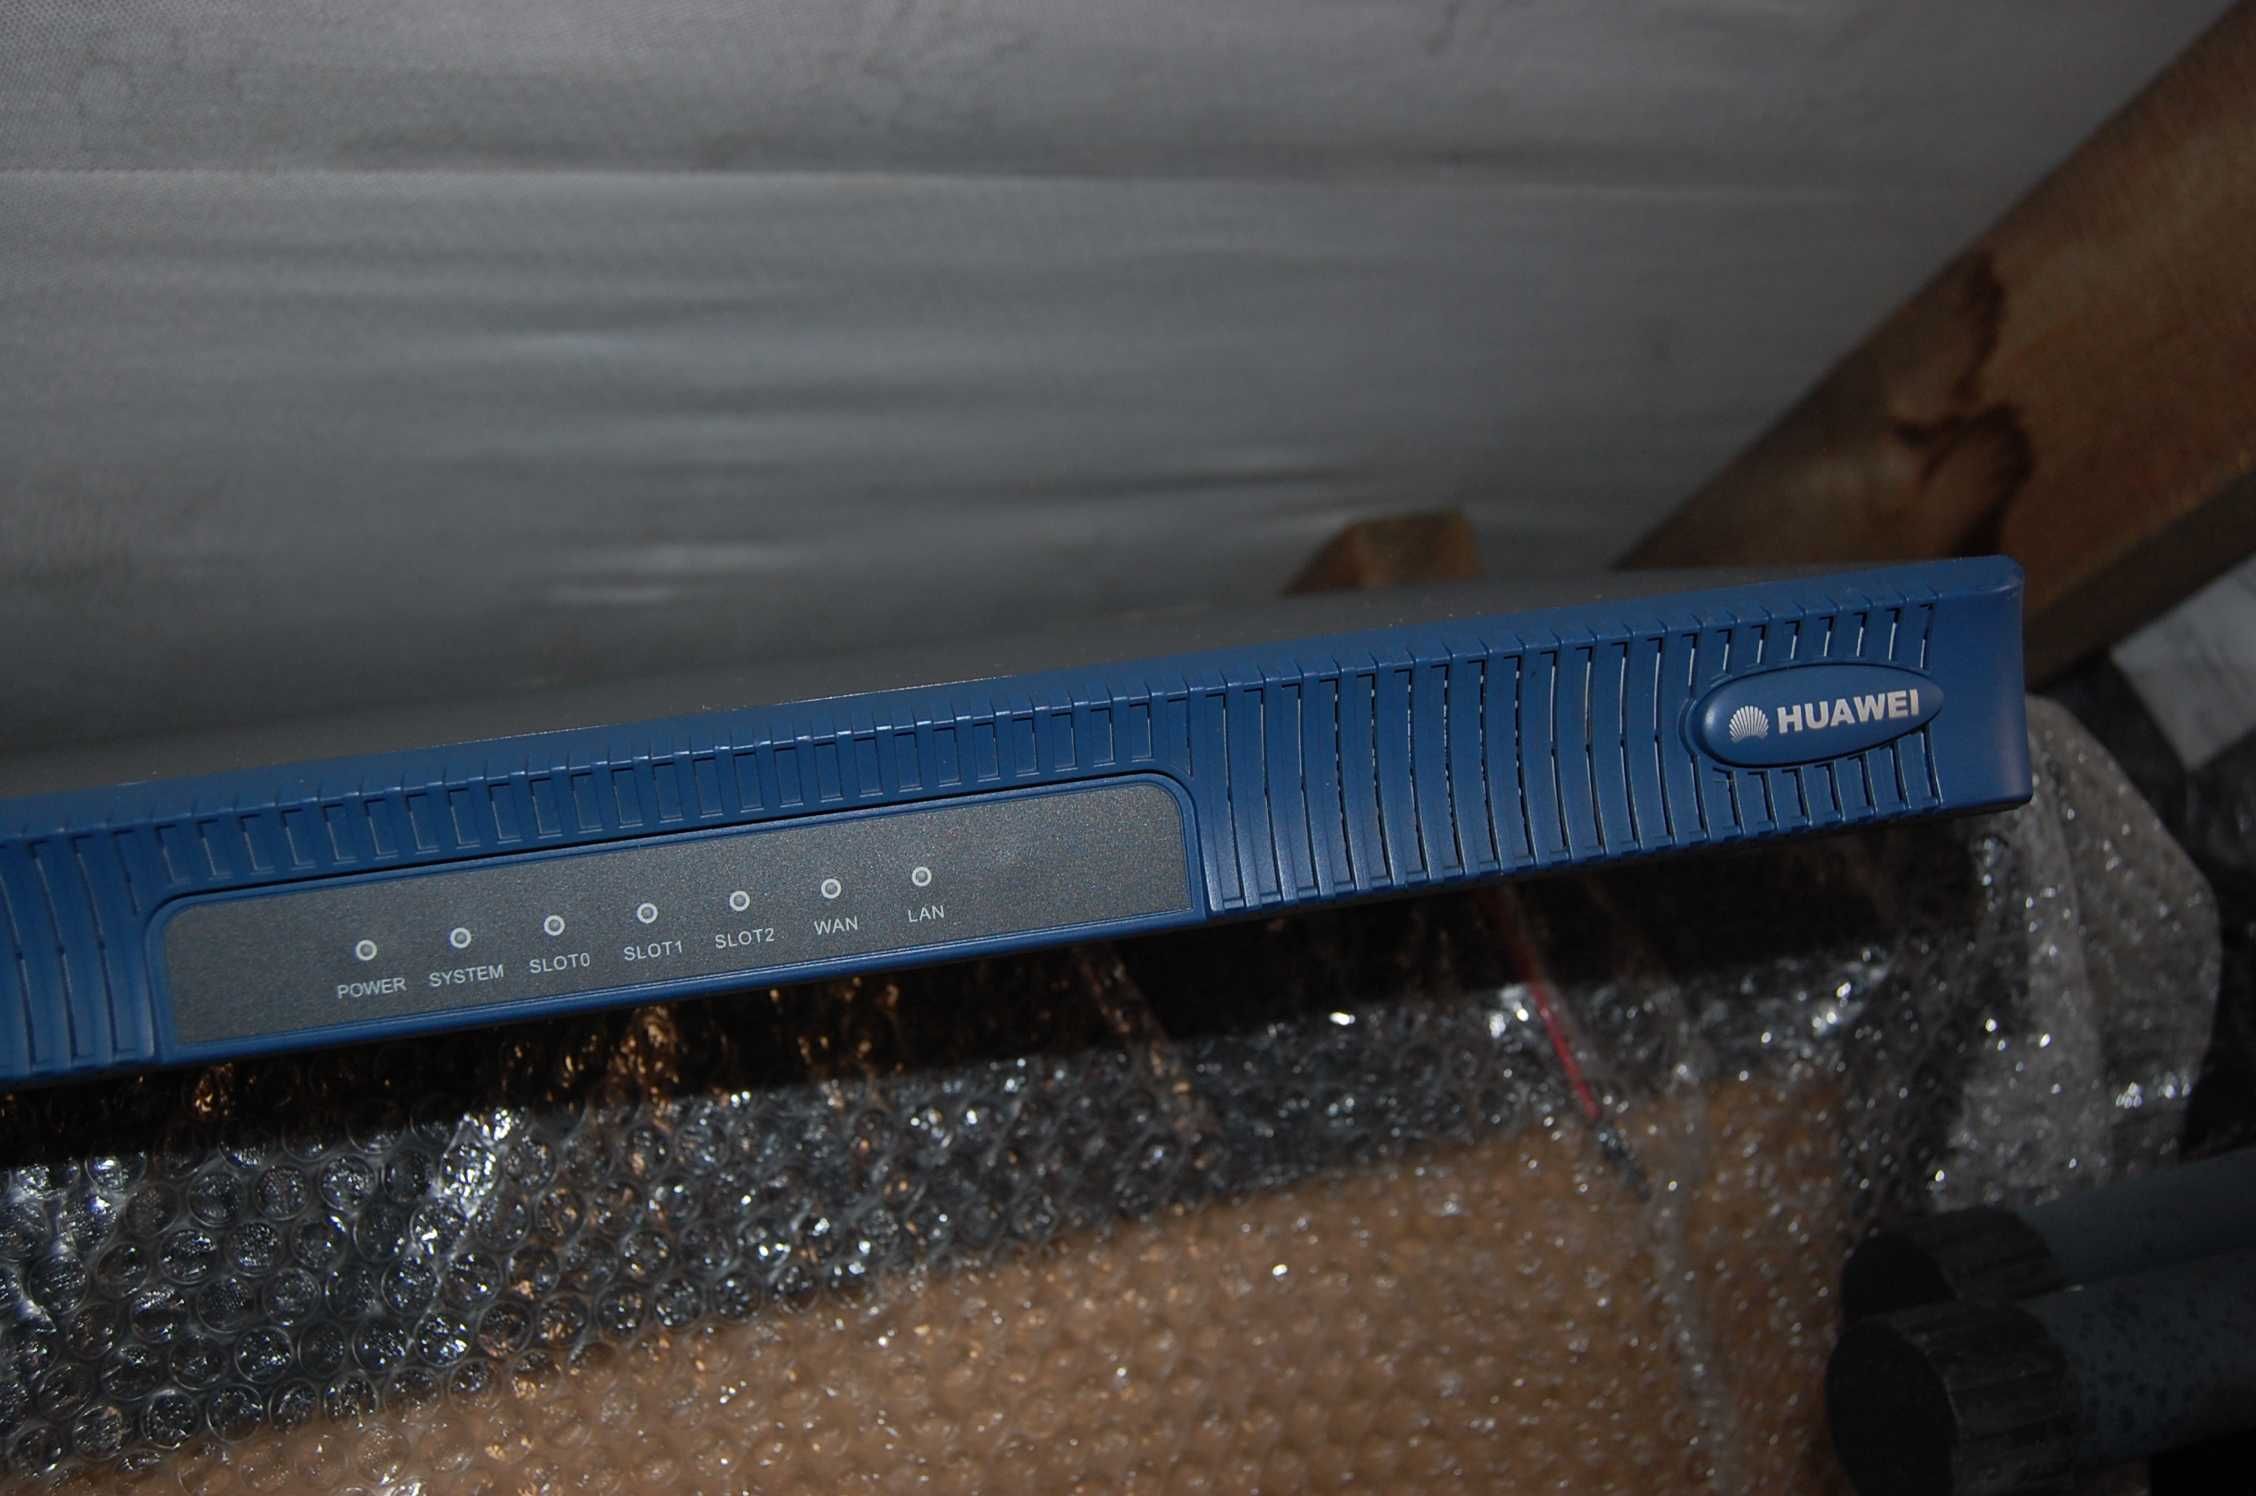 Huawei Quidway Router AR 28-10 ISDN, WAN, LAN, CON, AUX